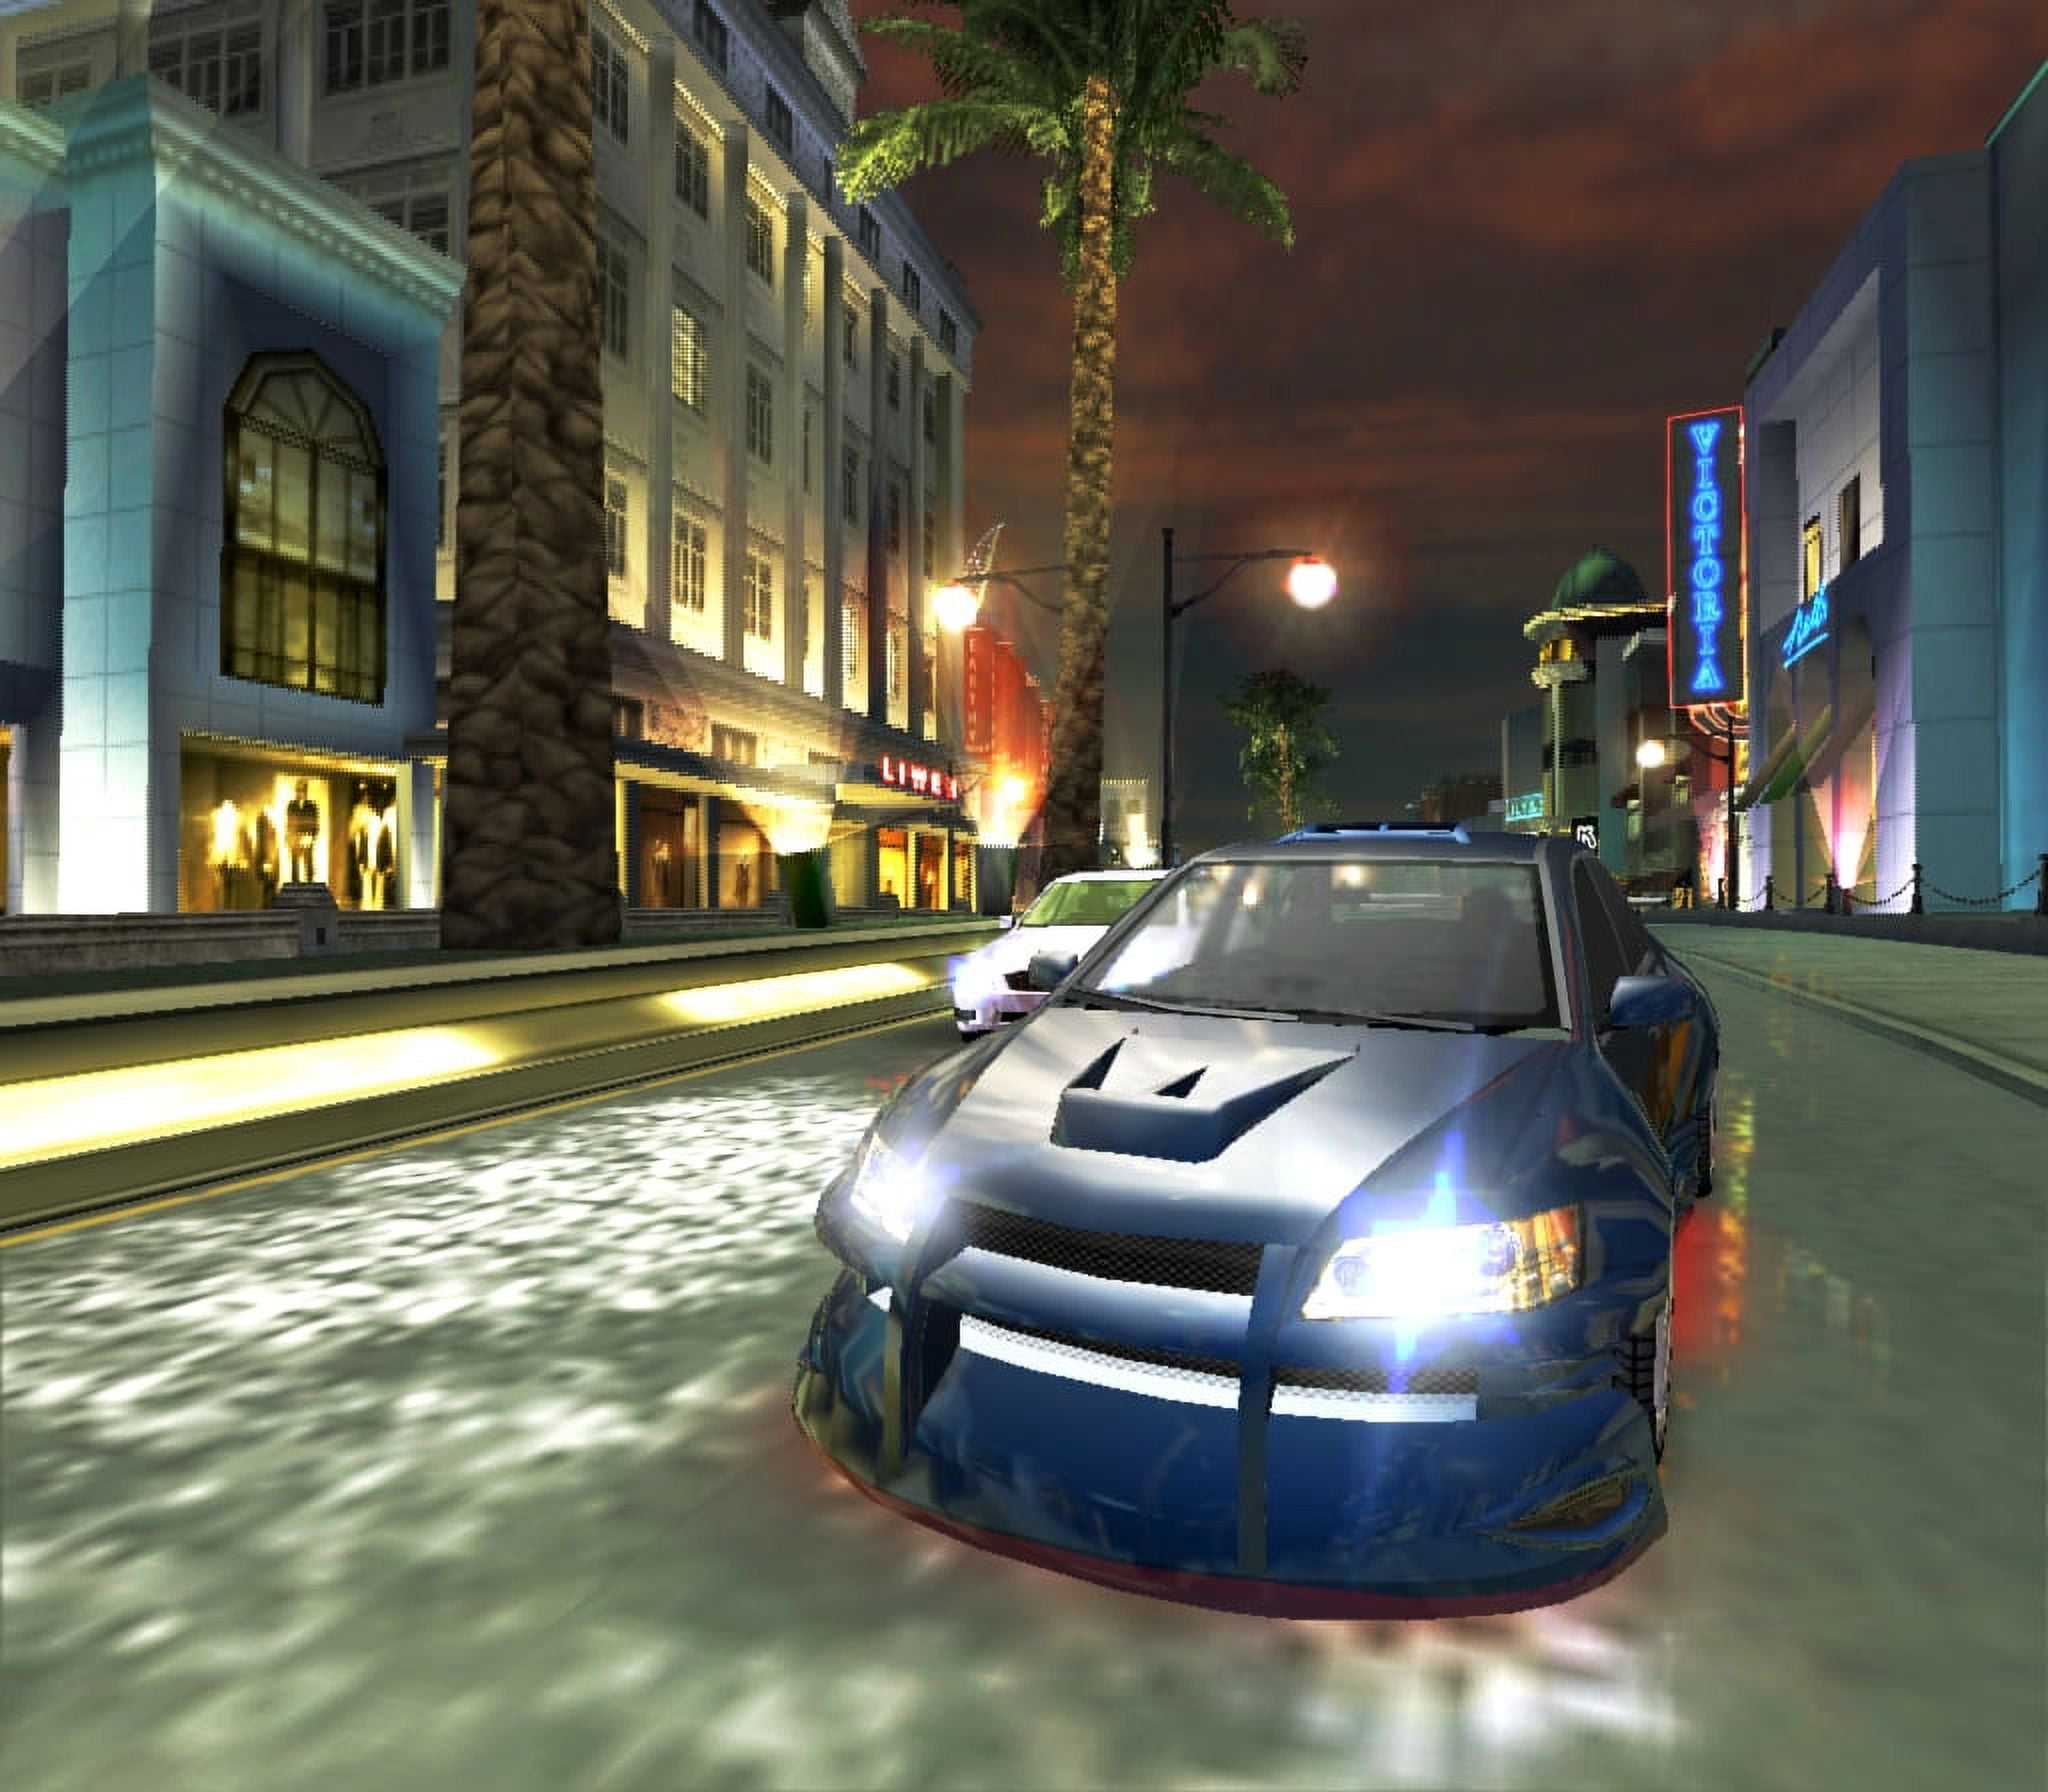 Need for Speed: Underground 2 - The Cutting Room Floor